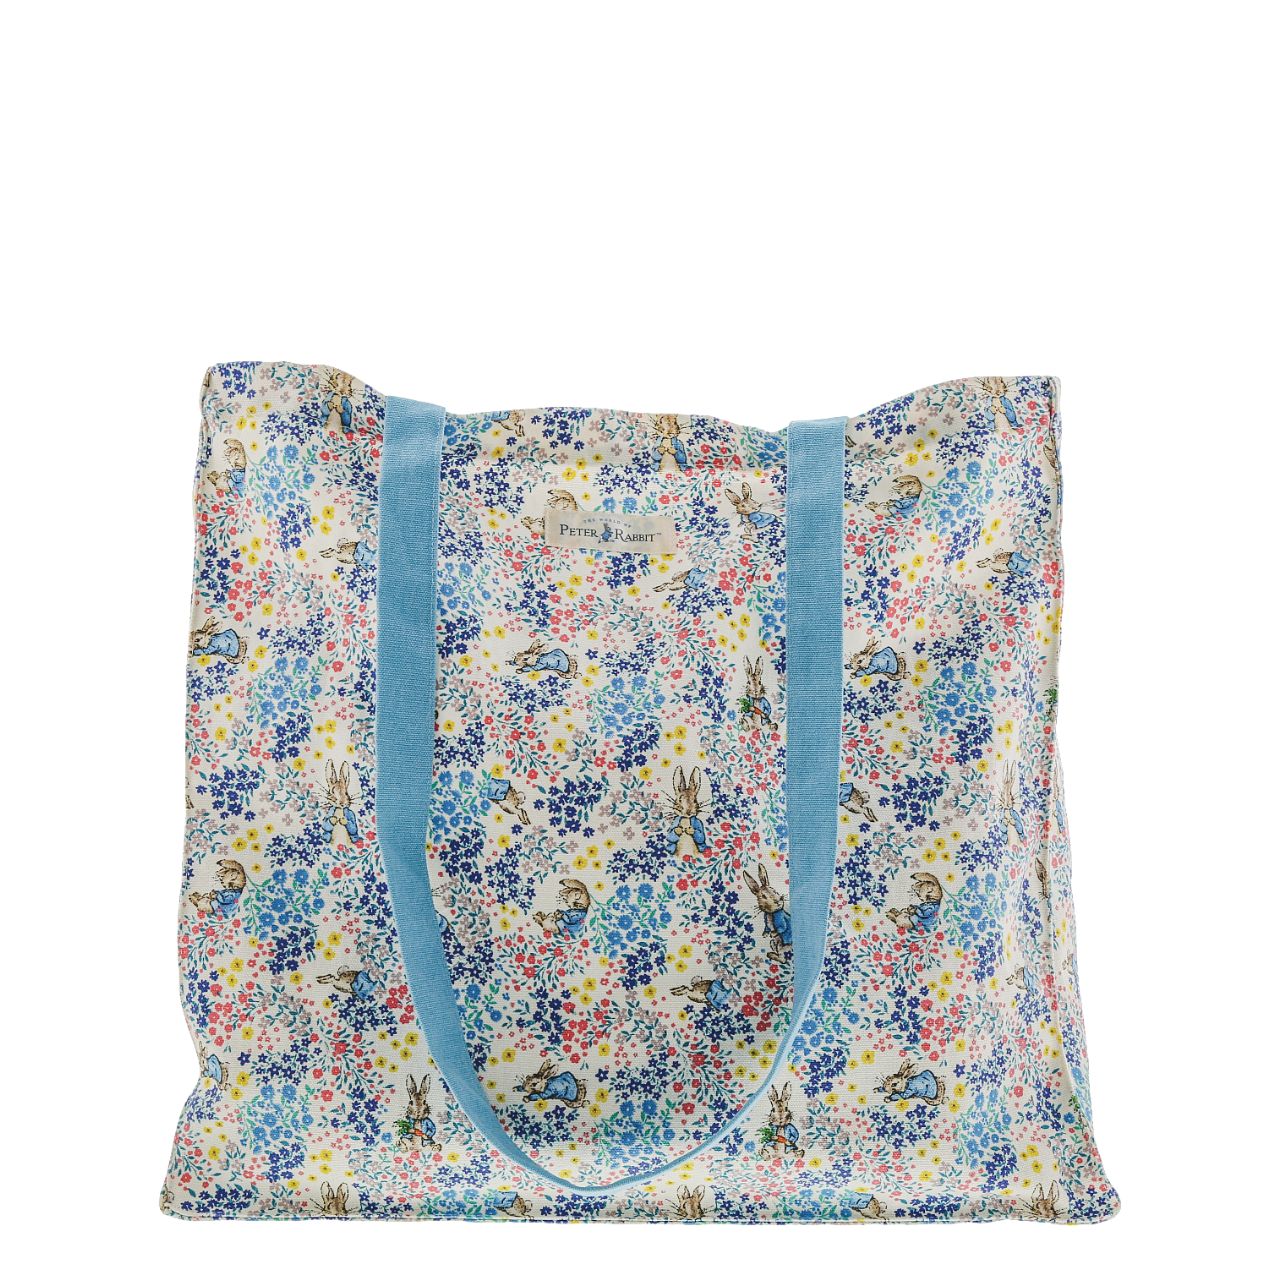 Beatrix Potter Peter Rabbit Garden Party Pop Up Tote Bag  Brand new from Enesco, this Peter Rabbit Garden Party Pop Up Tote Bag is the perfect accessory for anyone on the go. 